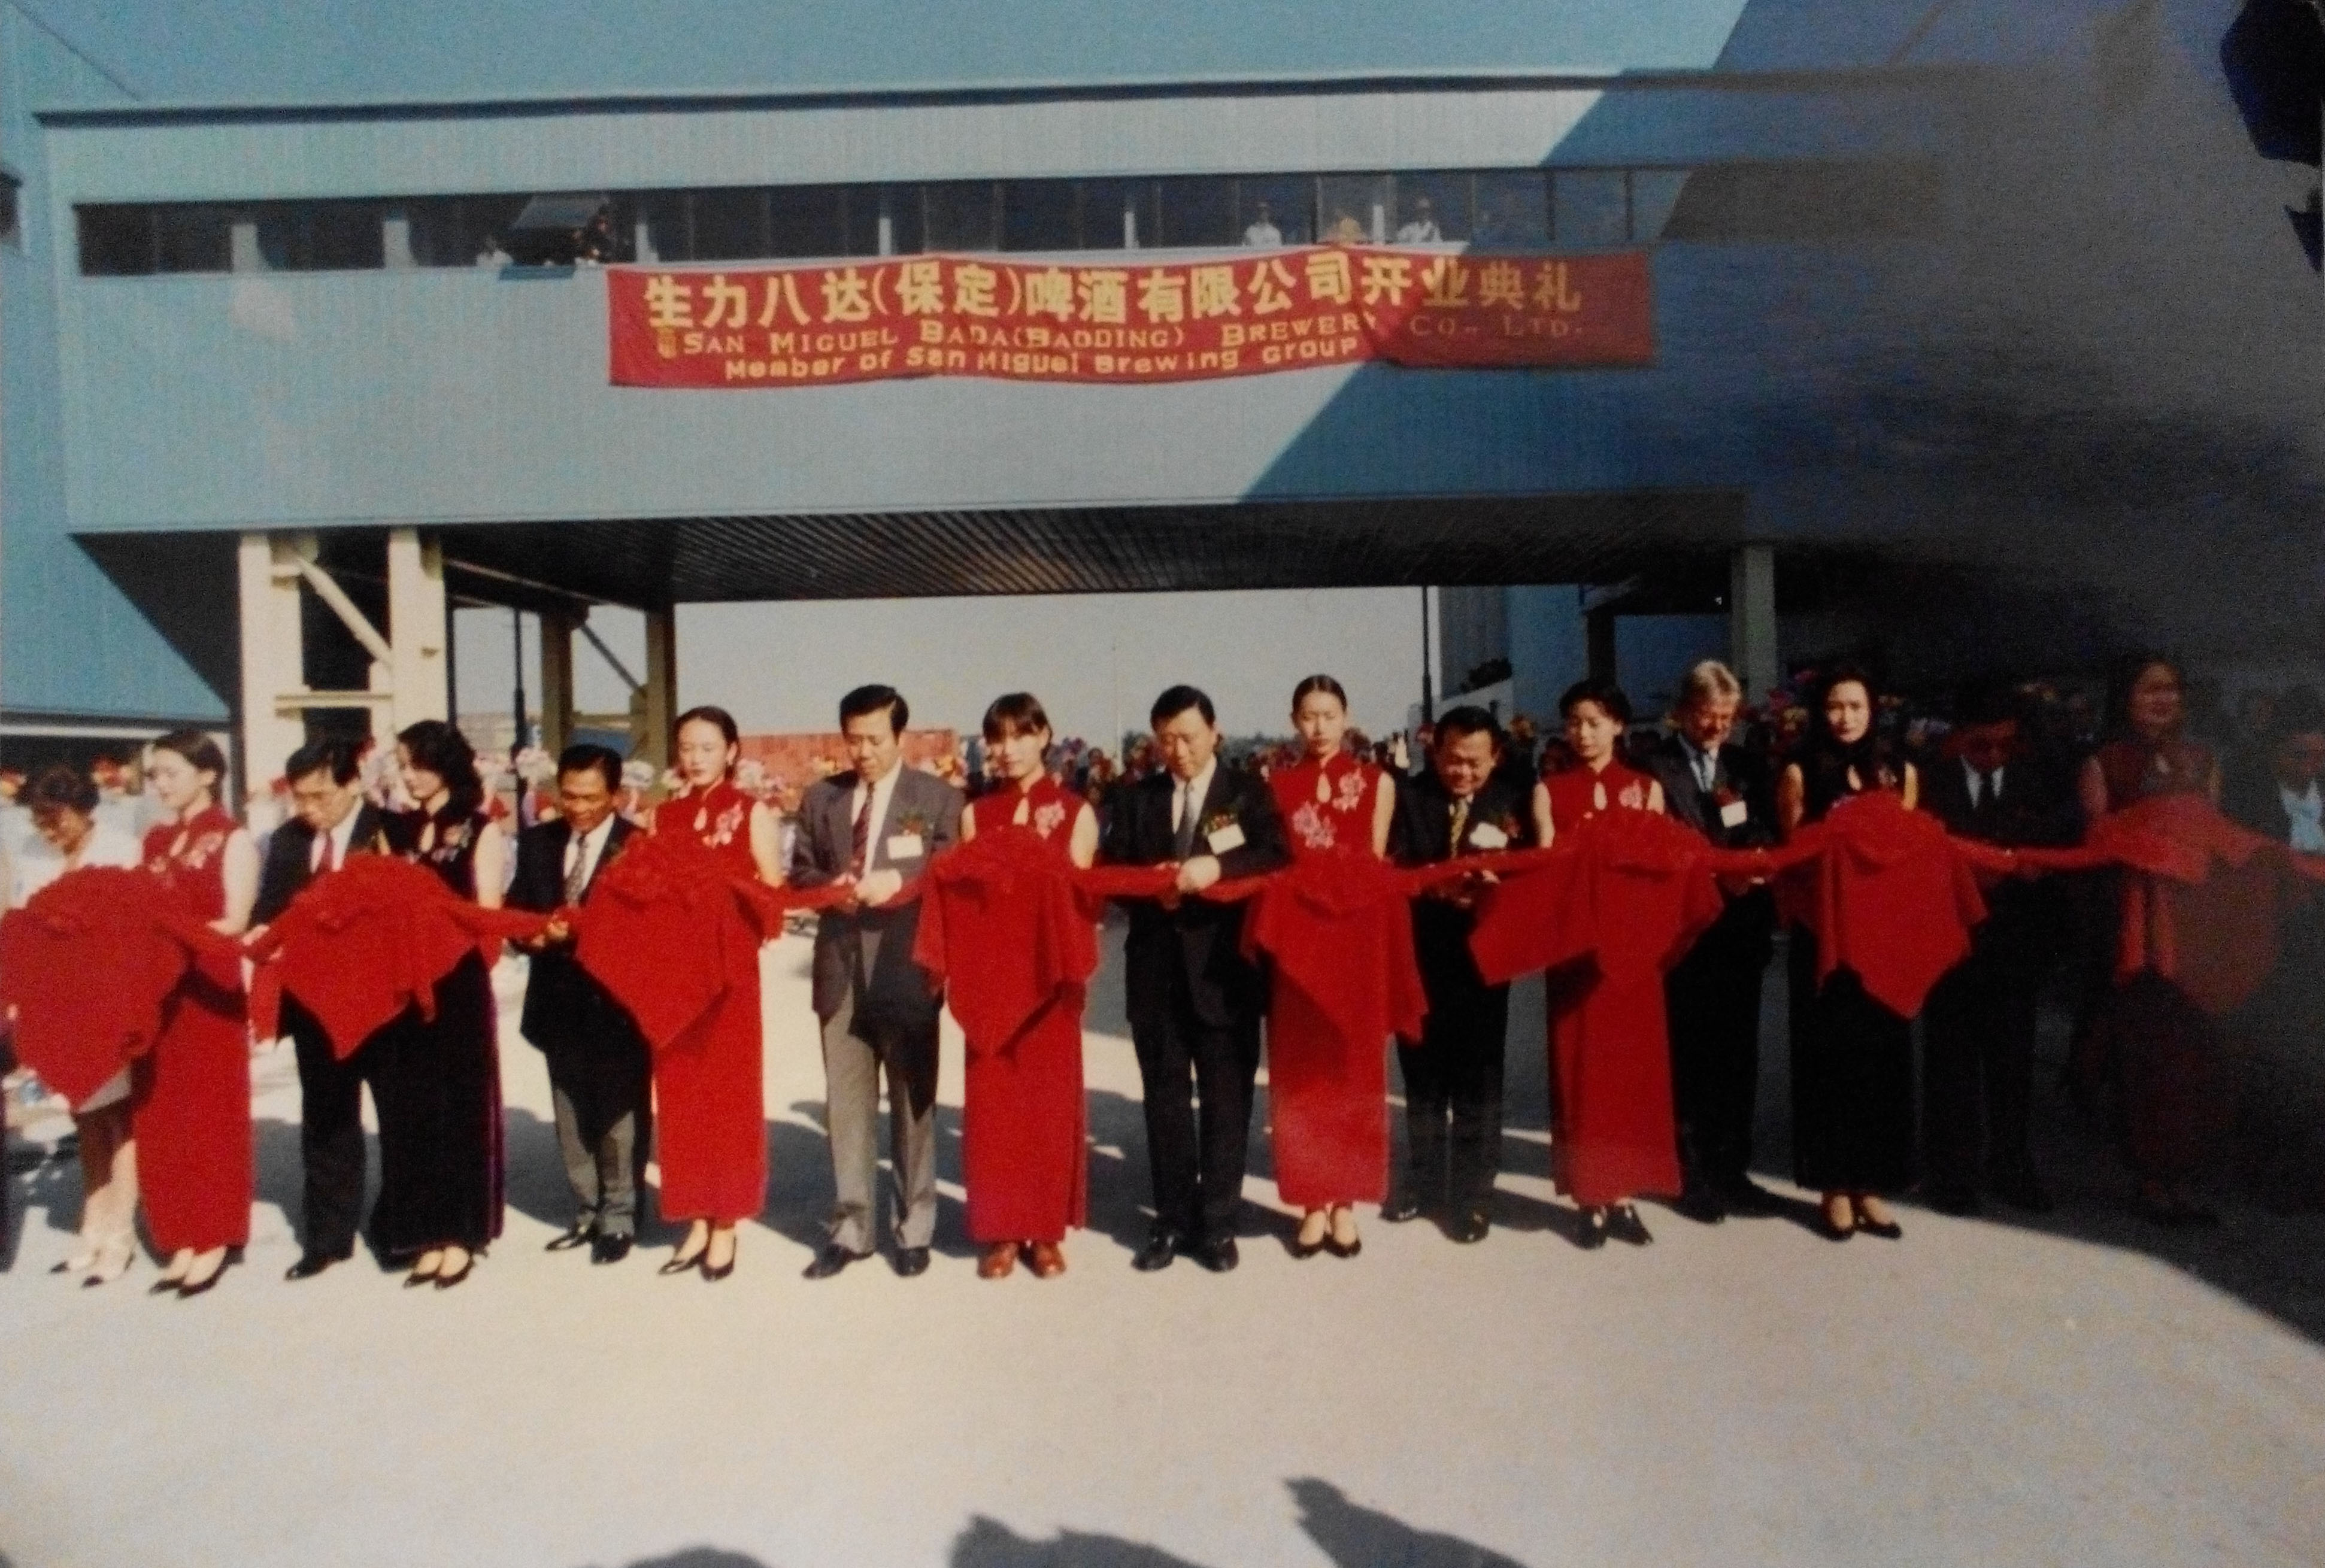 SMBB became San Miguel’s second brewery in China in 1994